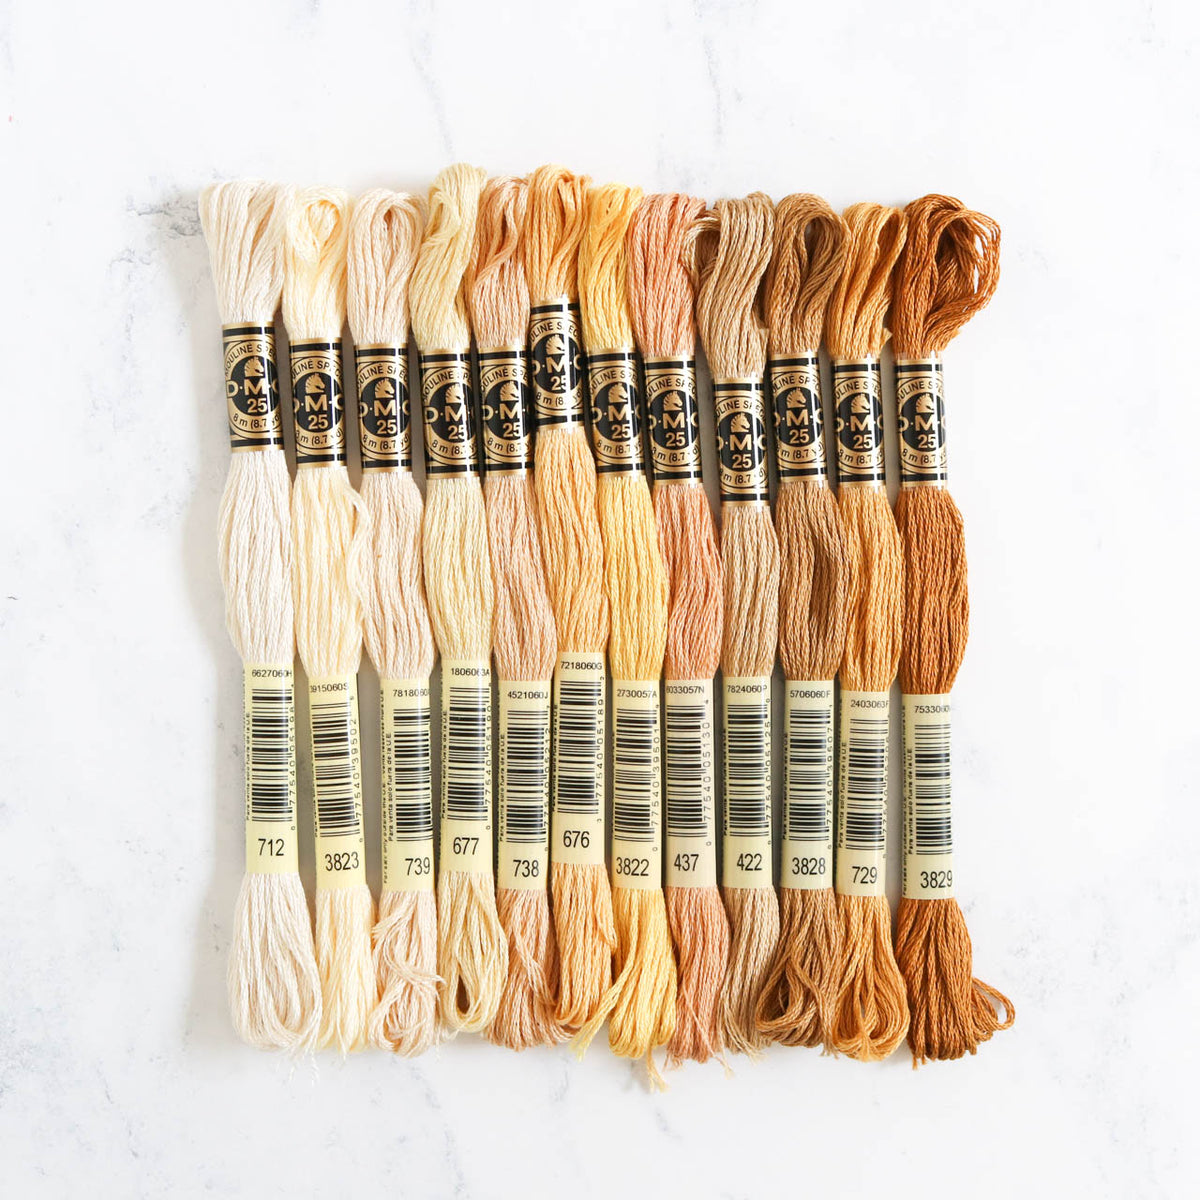 Thread Collection by Stitch People - Blonde Hair